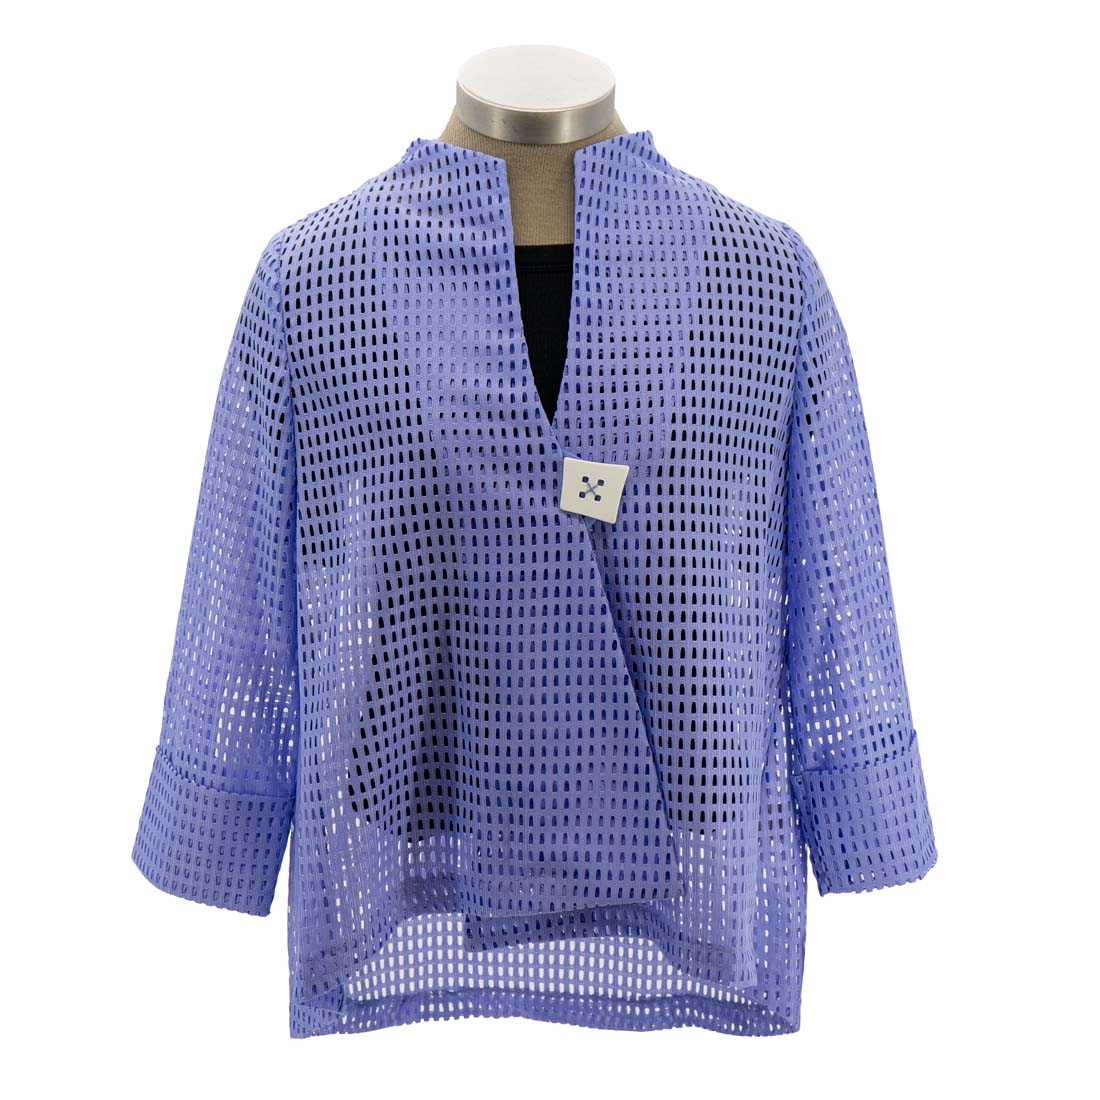 Periwinkle Mesh One Button Jacket